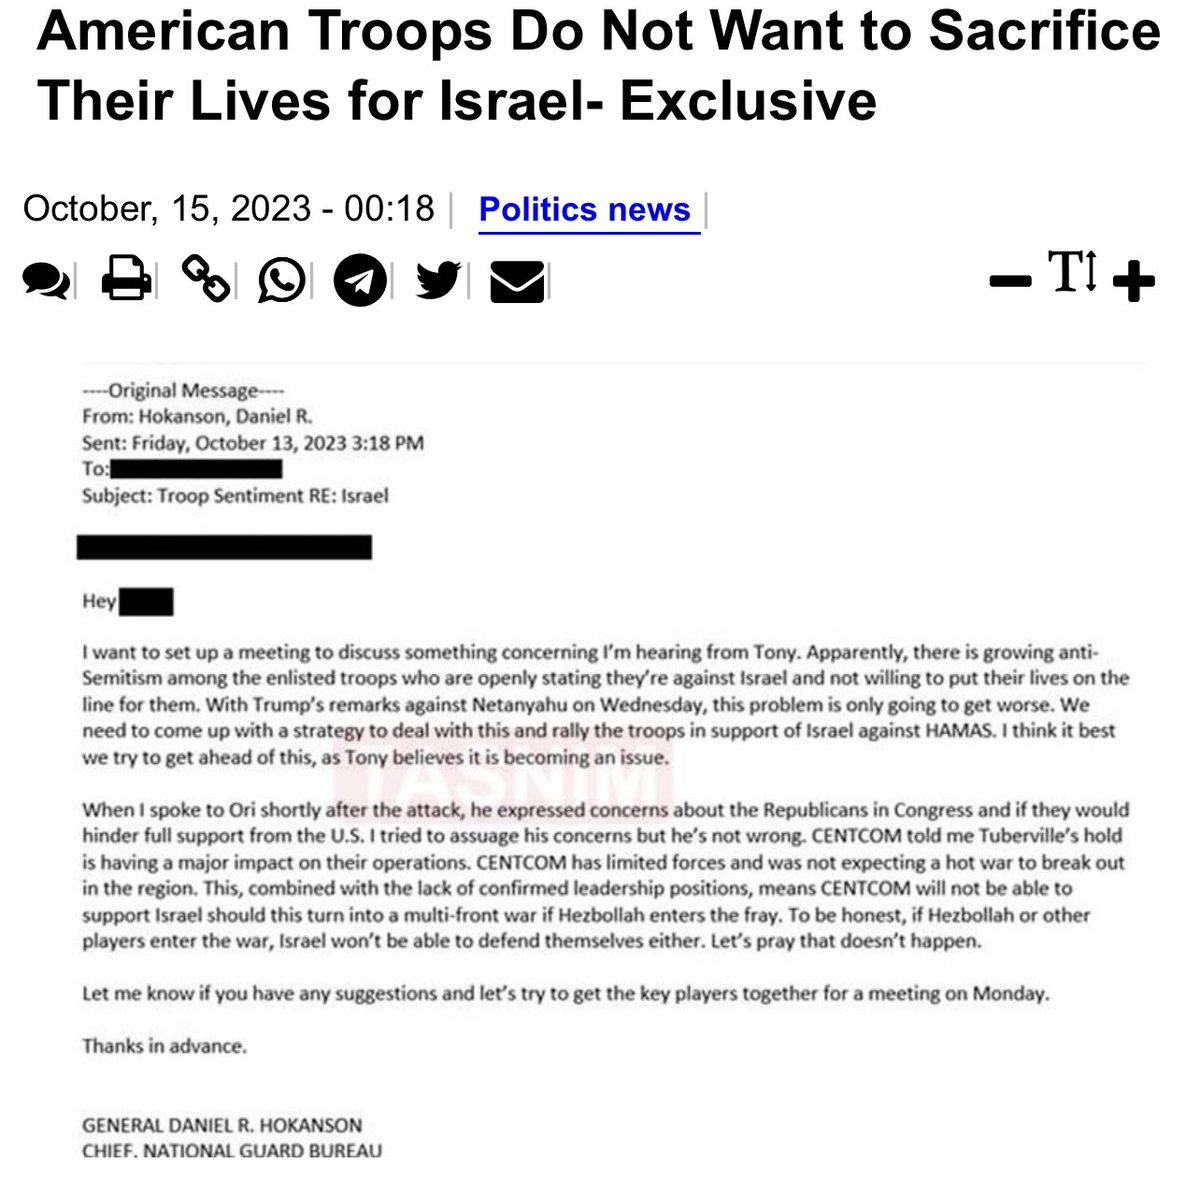 Leaked email reveals that military Generals are getting concerned because their soldiers do not want to go die for Israel. Calling it a “rise in antisemitism” 

This explains the total 180 flip in pro-Israel propaganda today on all news networks. 

They’re trying to manufacture